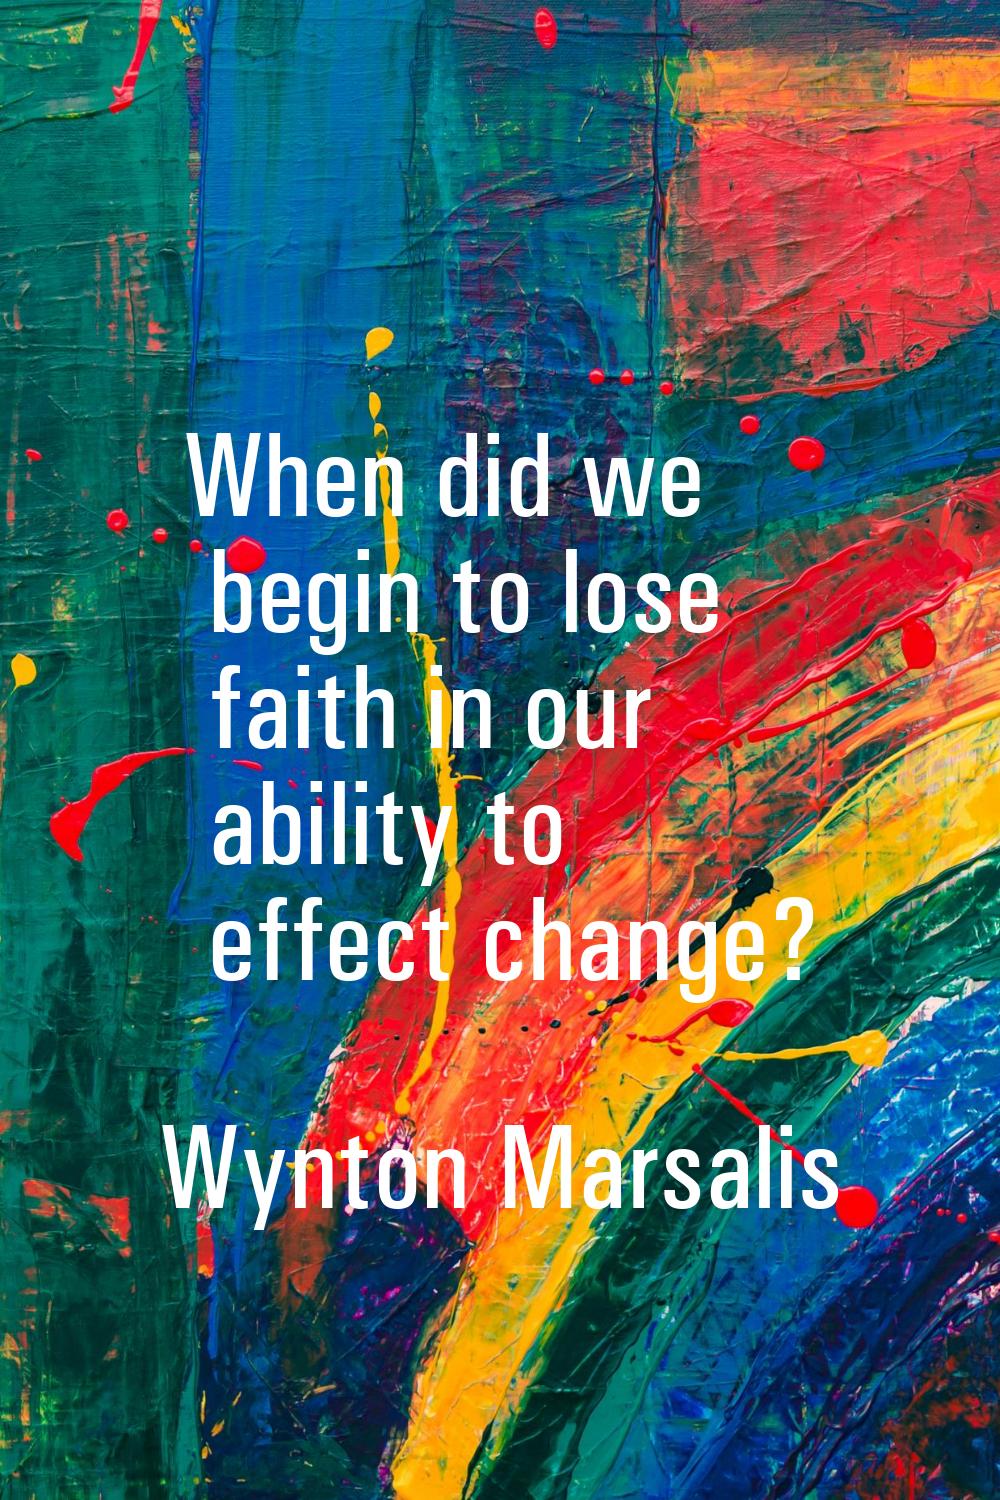 When did we begin to lose faith in our ability to effect change?